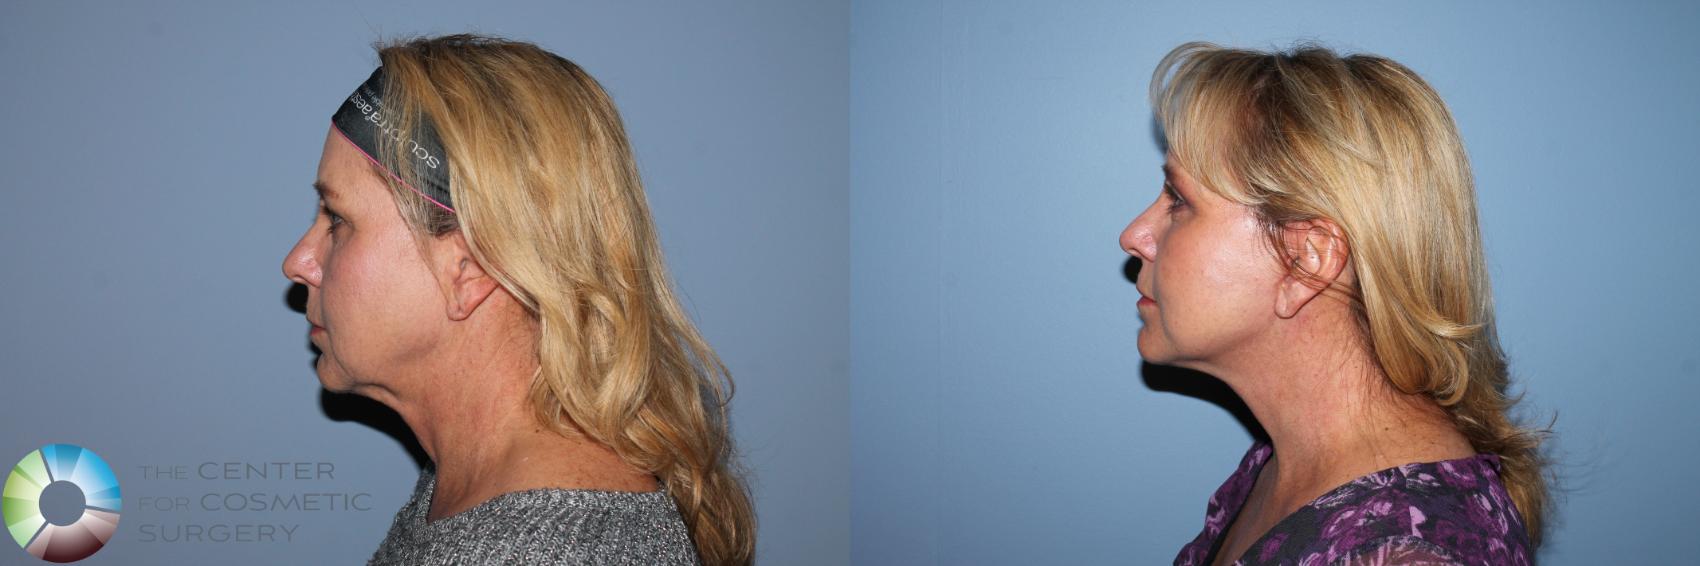 Before & After Mini Facelift Case 11495 Left Side View in Golden, CO